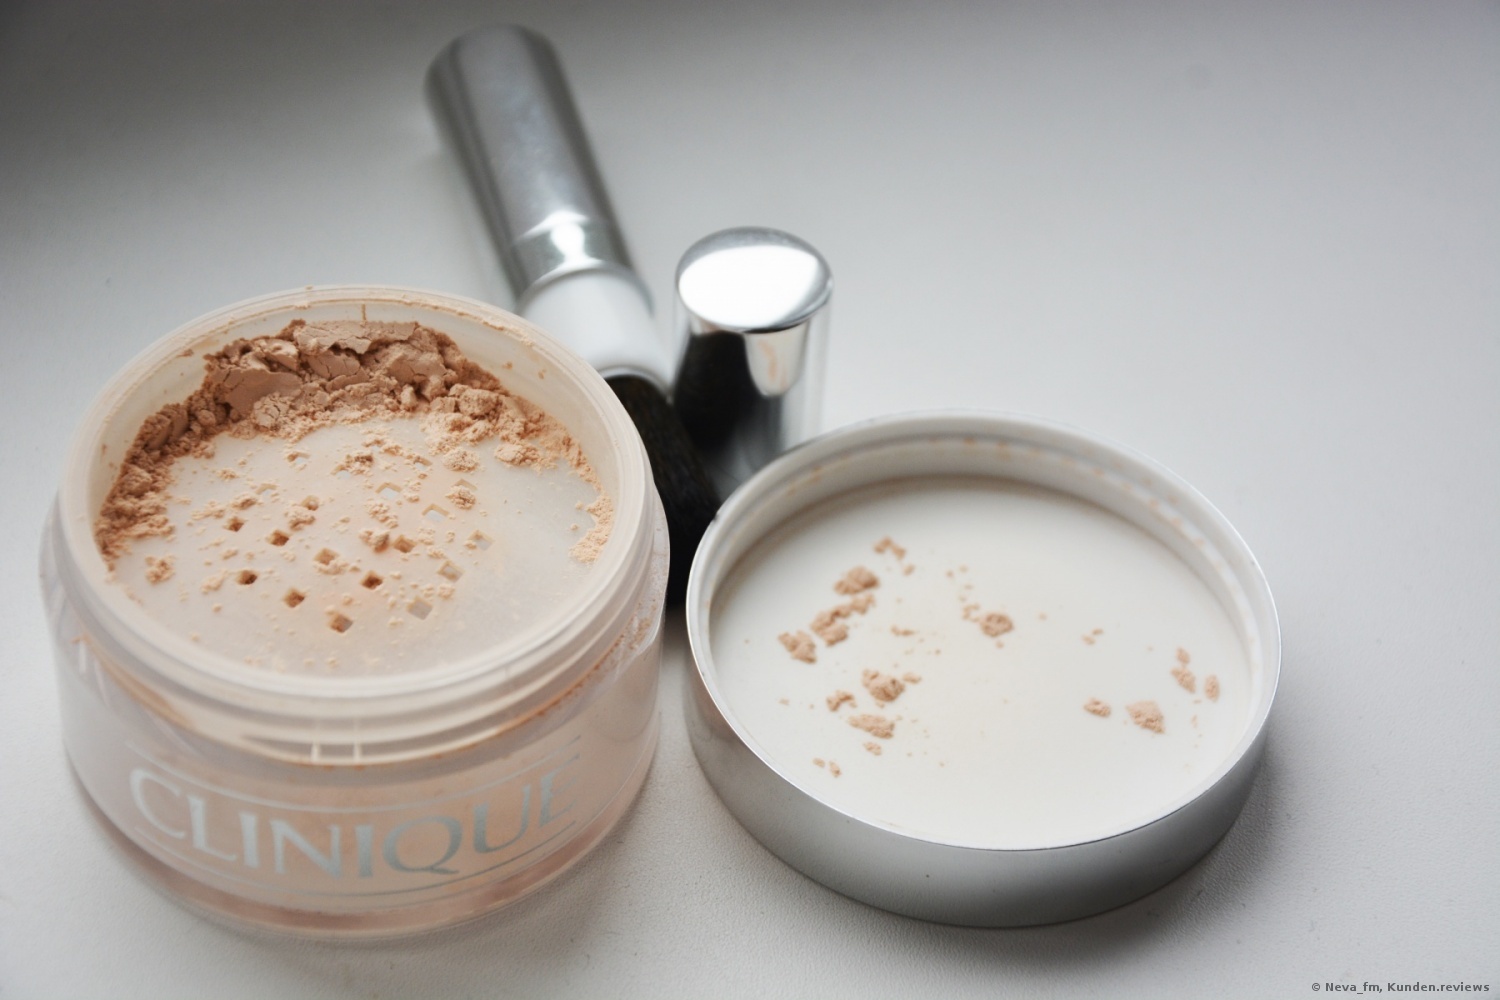 Clinique Puder Blended Face Powder and Brush